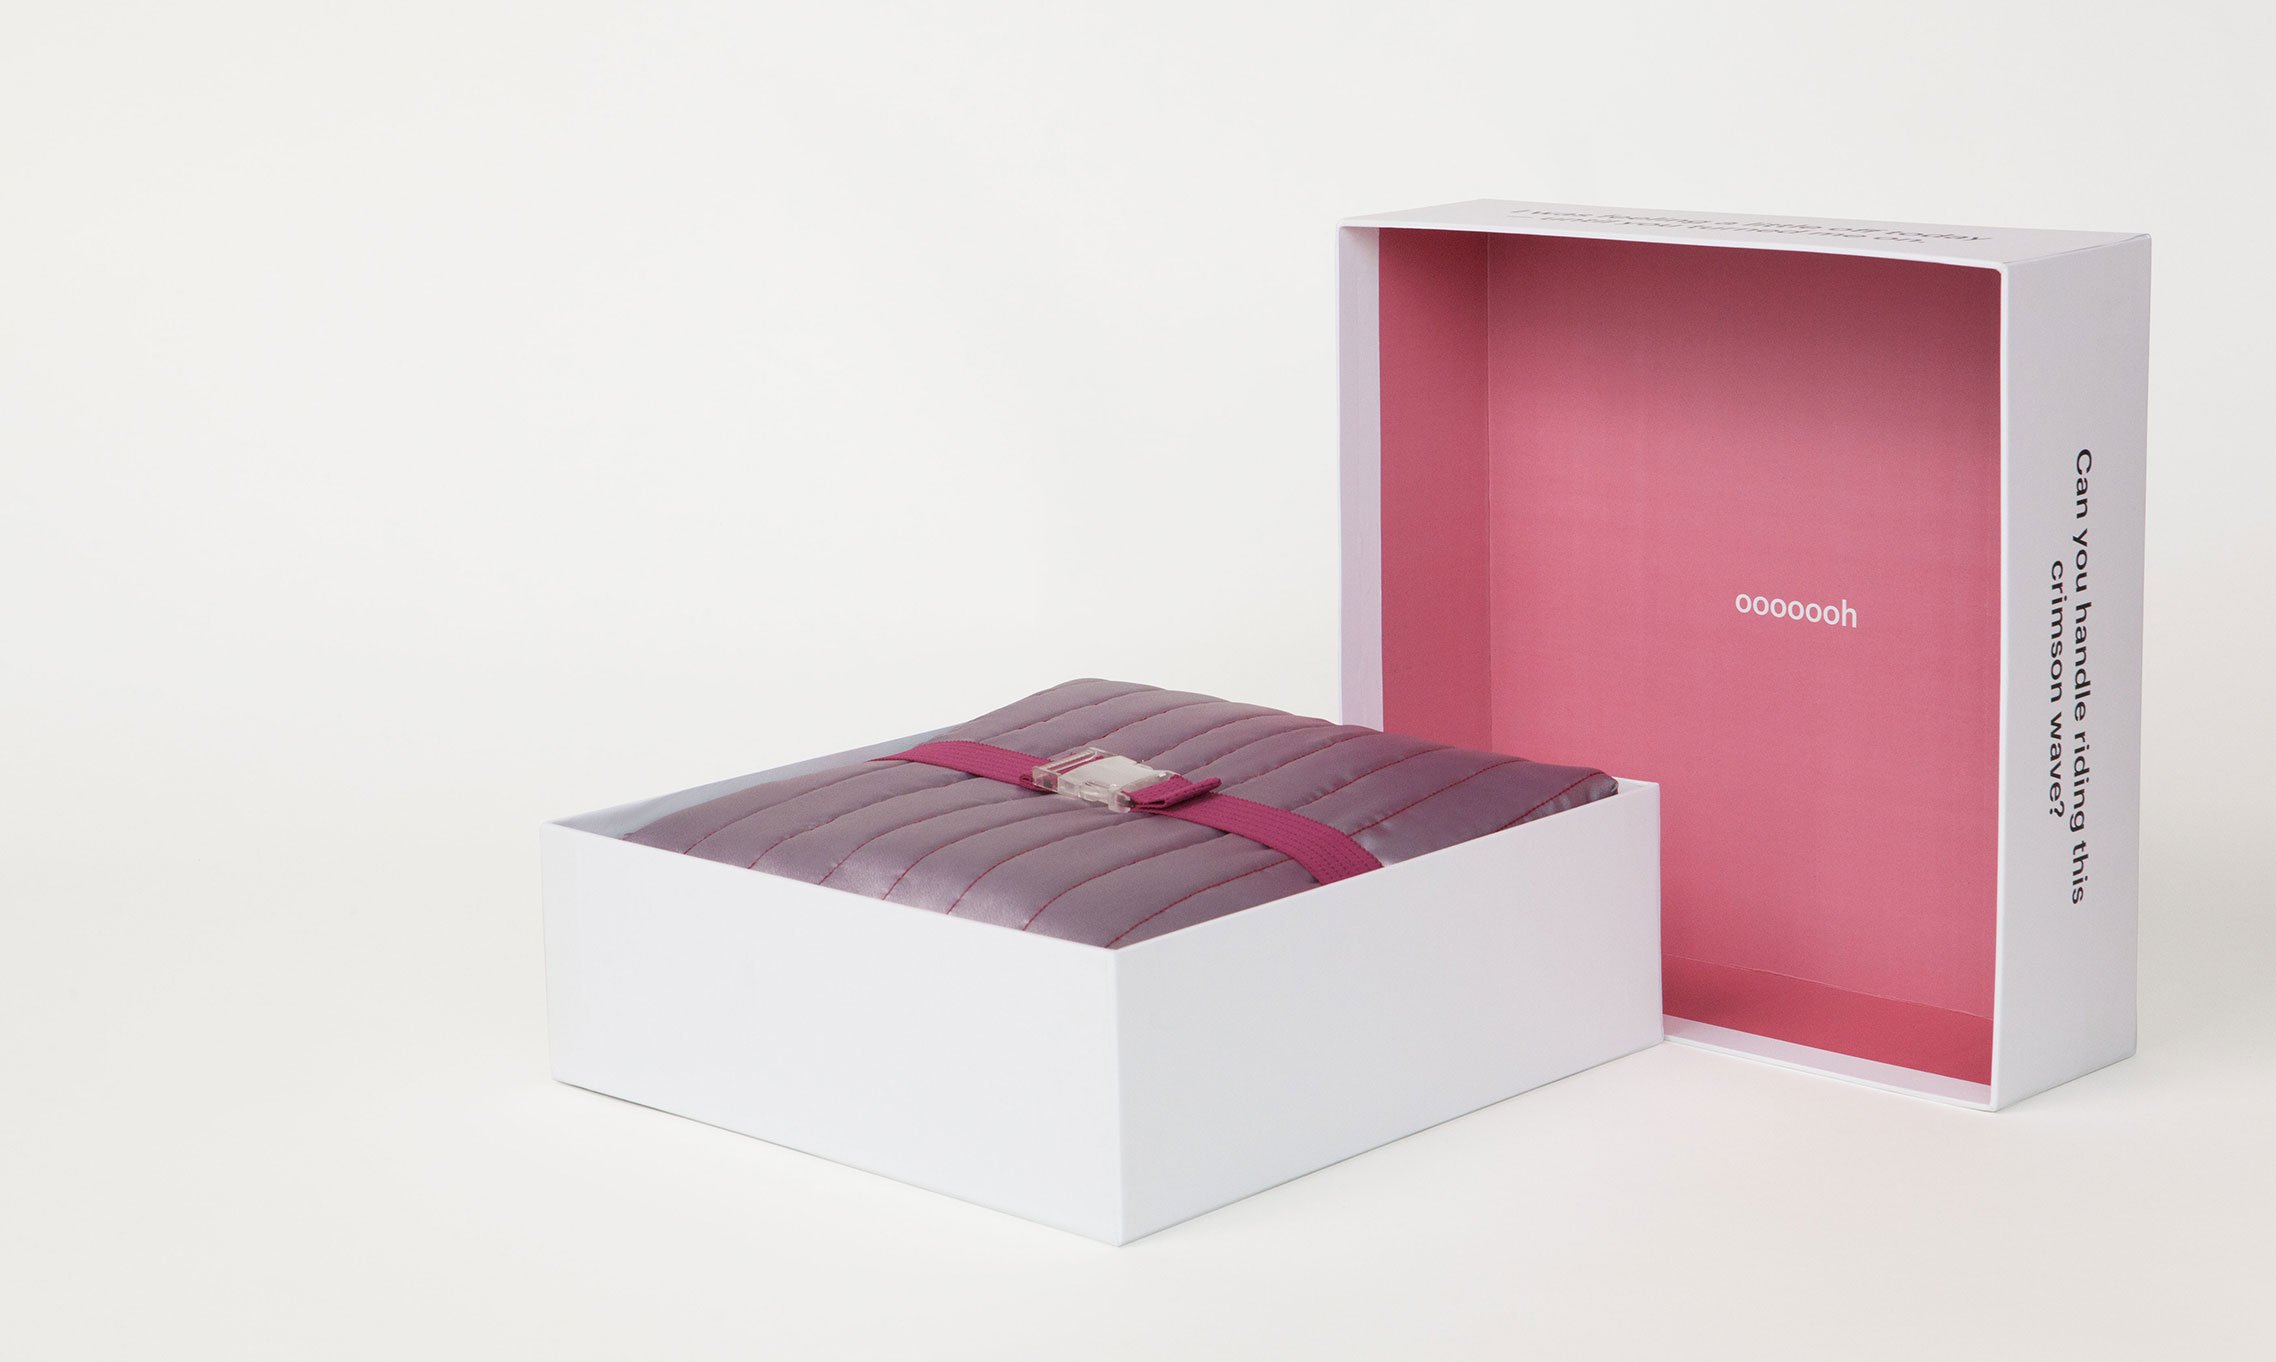 period-sex-blanket-unboxed